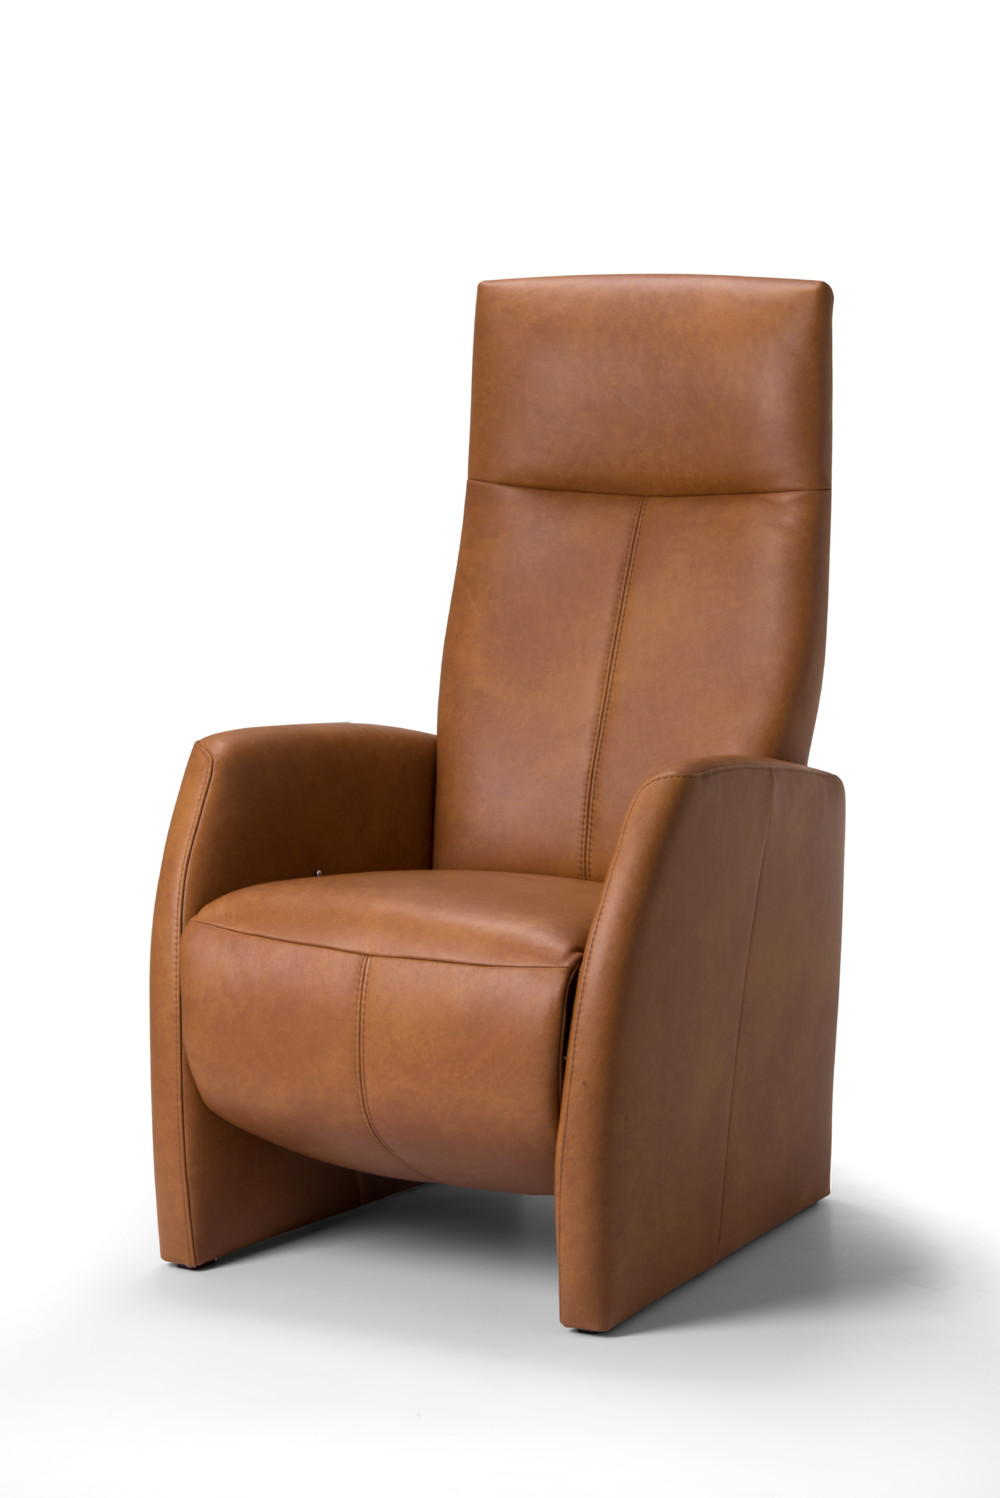 Relaxfauteuil F4-300